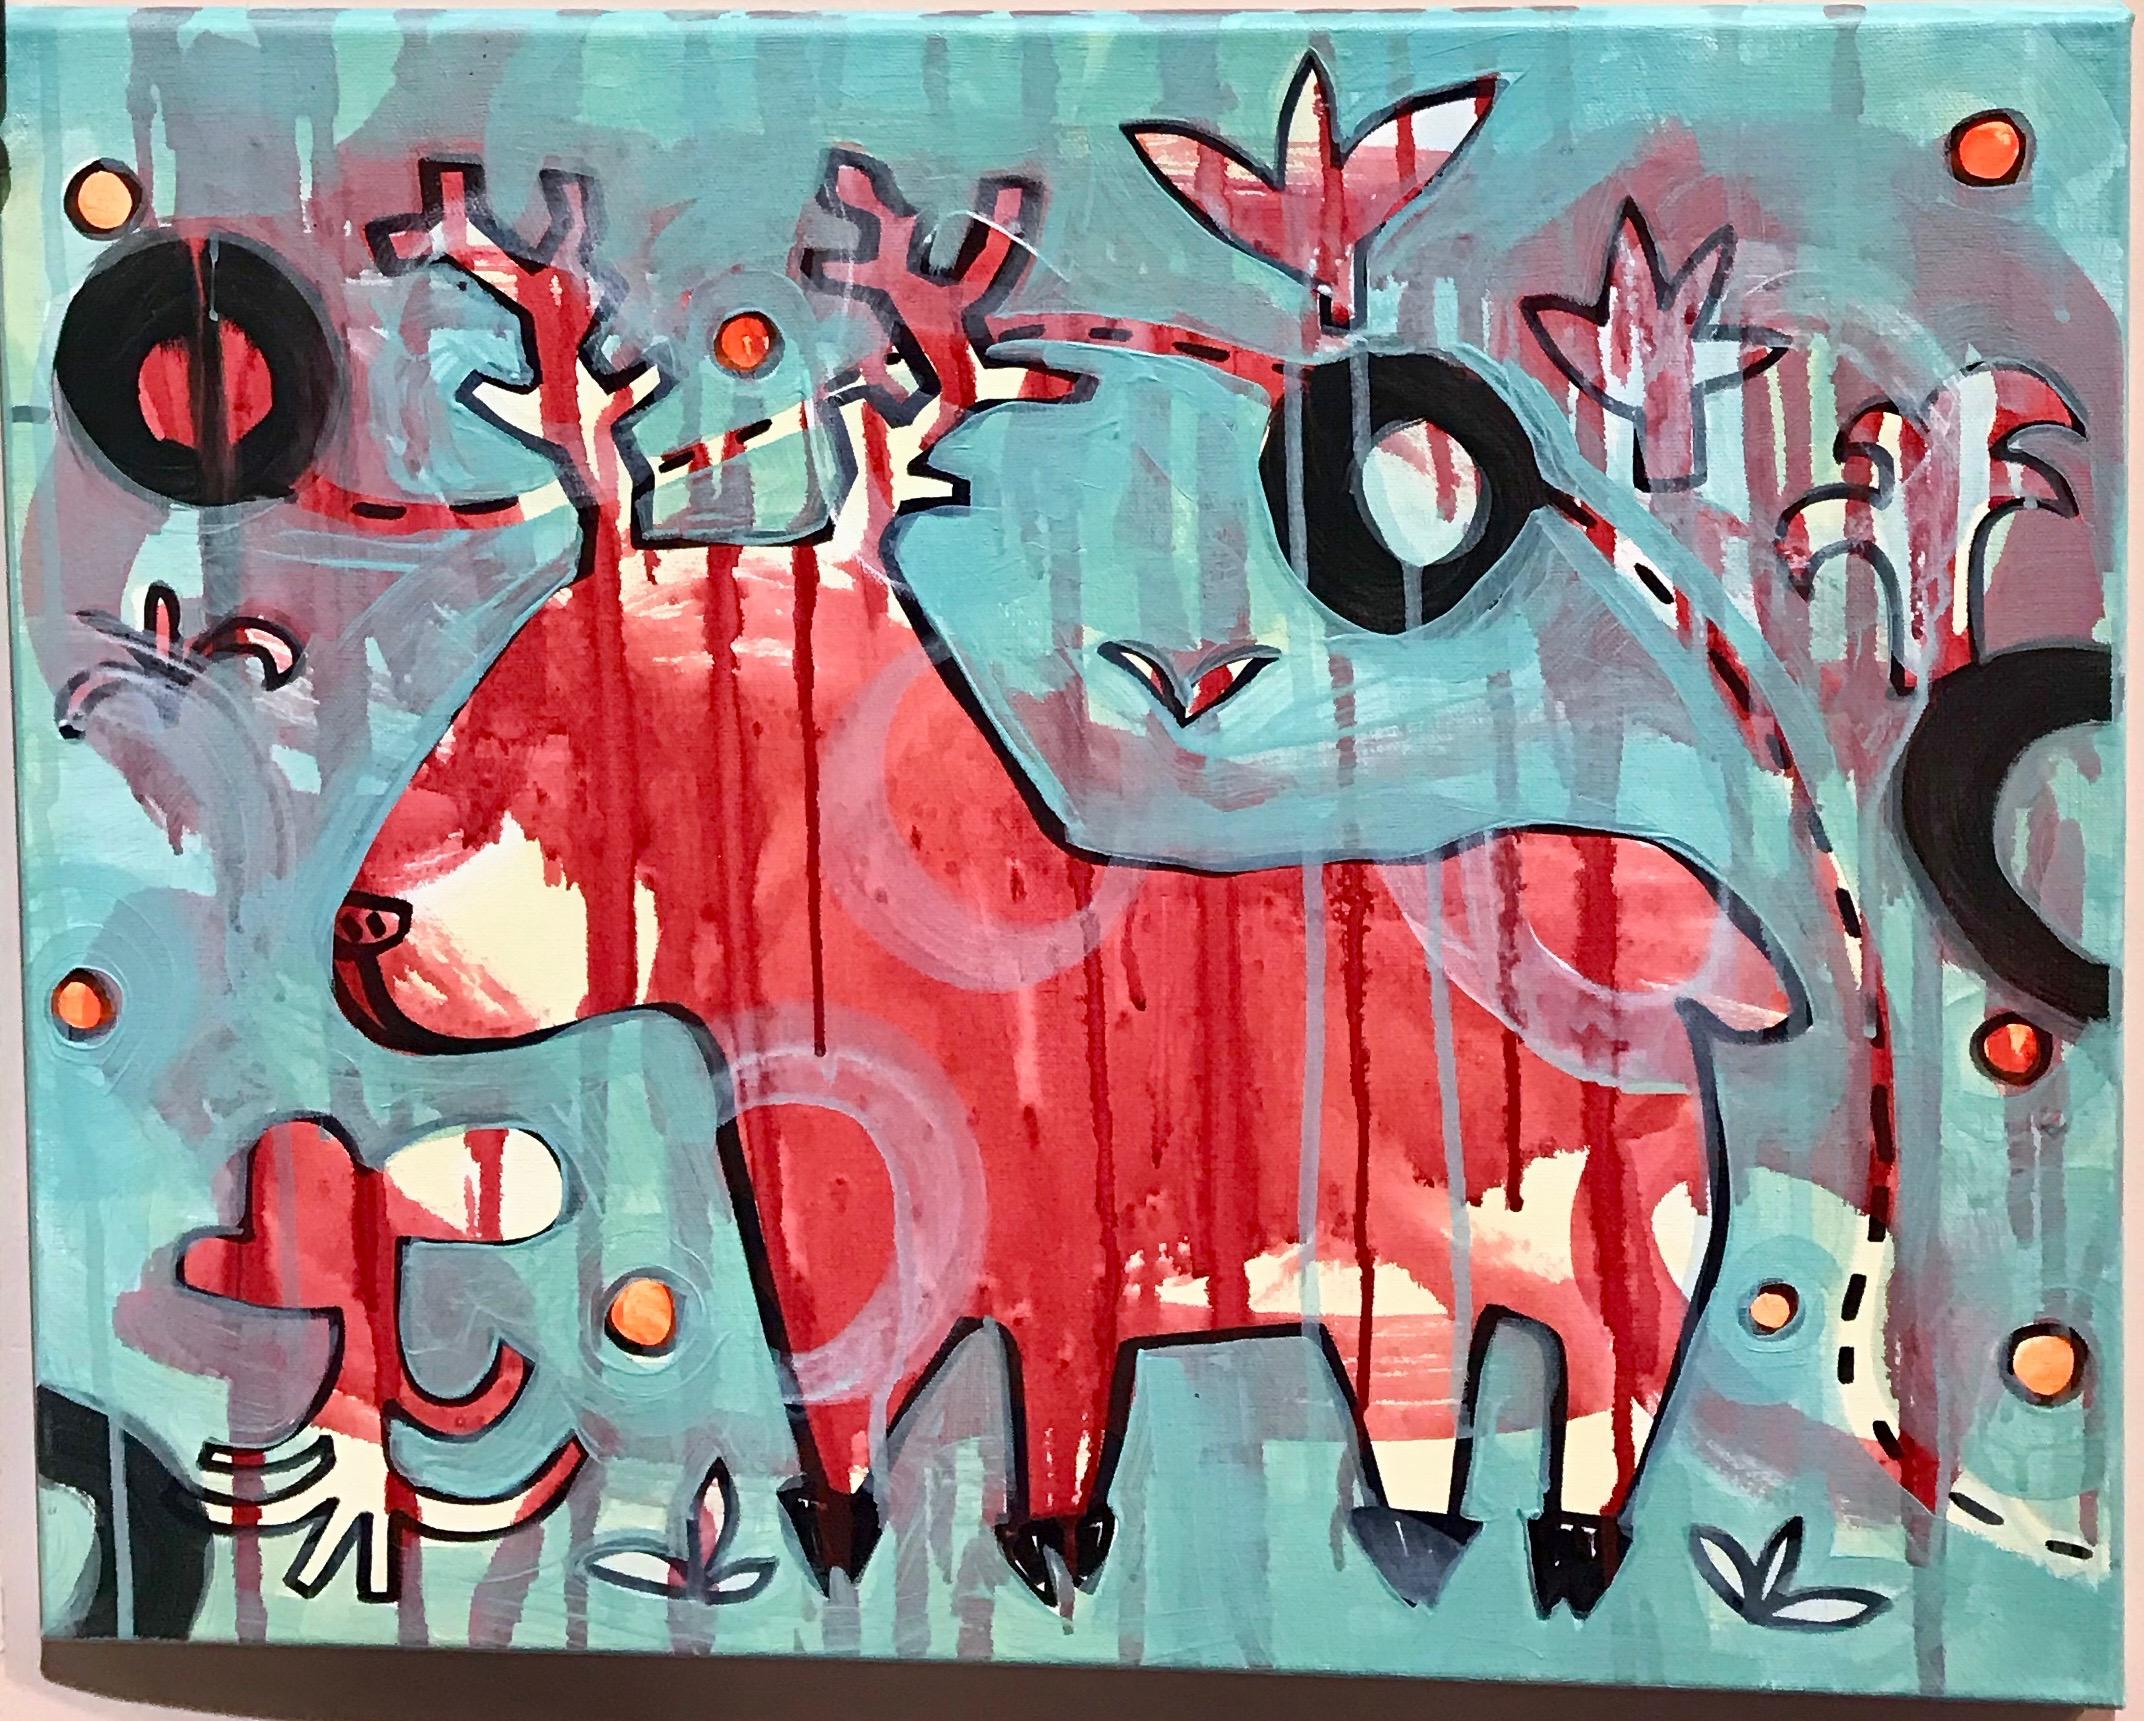 He Comes to the Gallery, painting by Melanie Yazzie, deer, pink, animal, blue